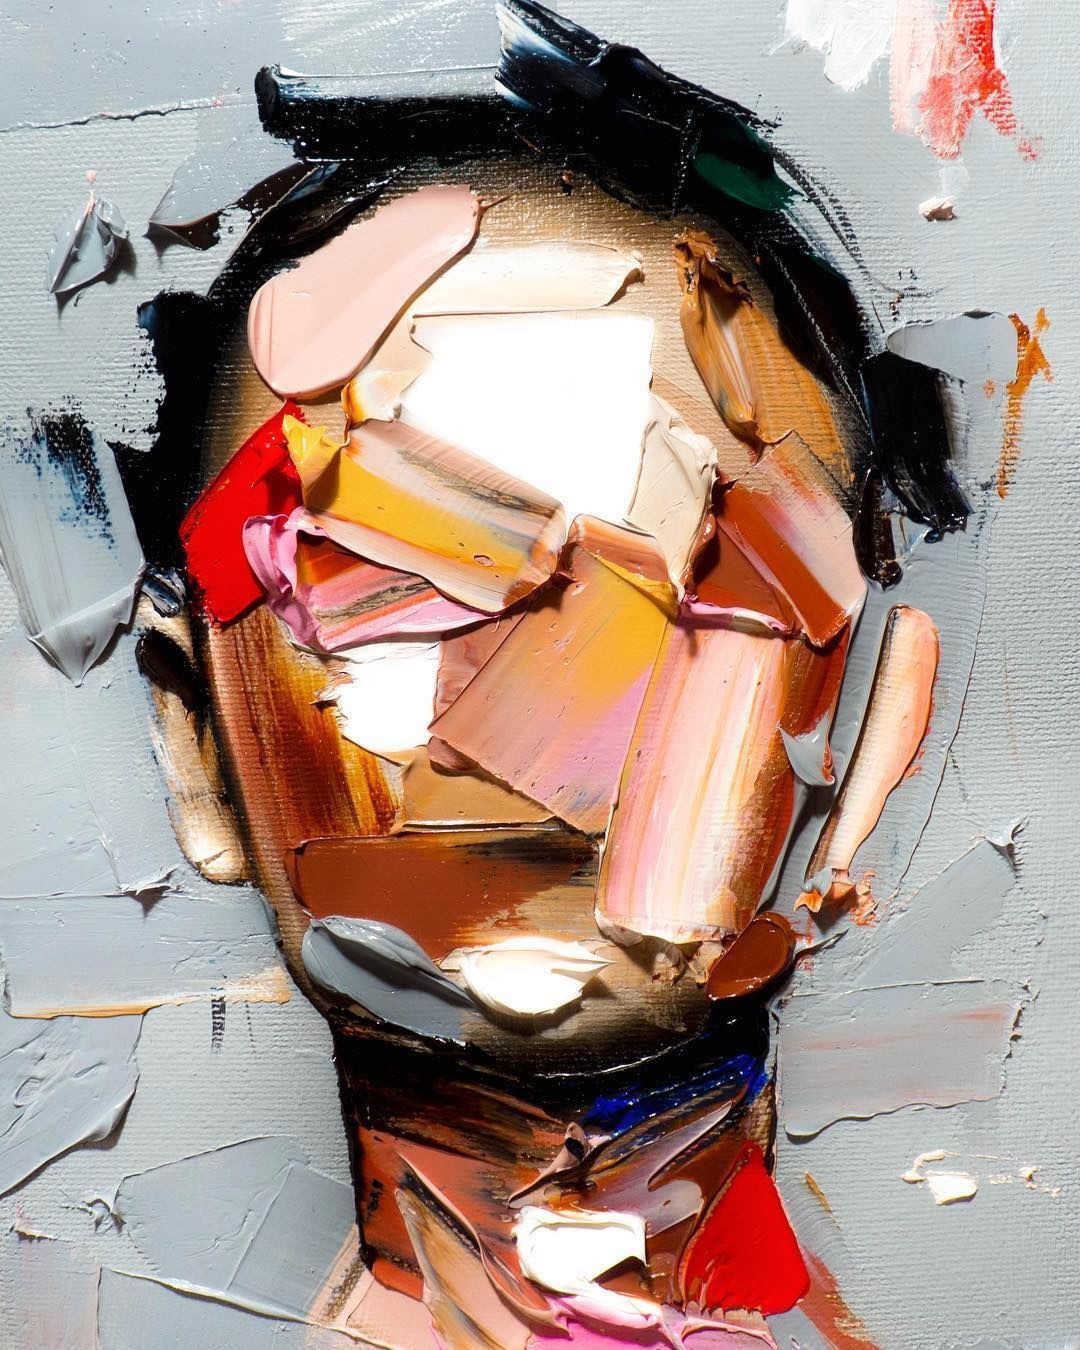 Thick Strokes of Paint Create Featureless Portraits in Abstracted Paintings by Joseph Lee — Colossal